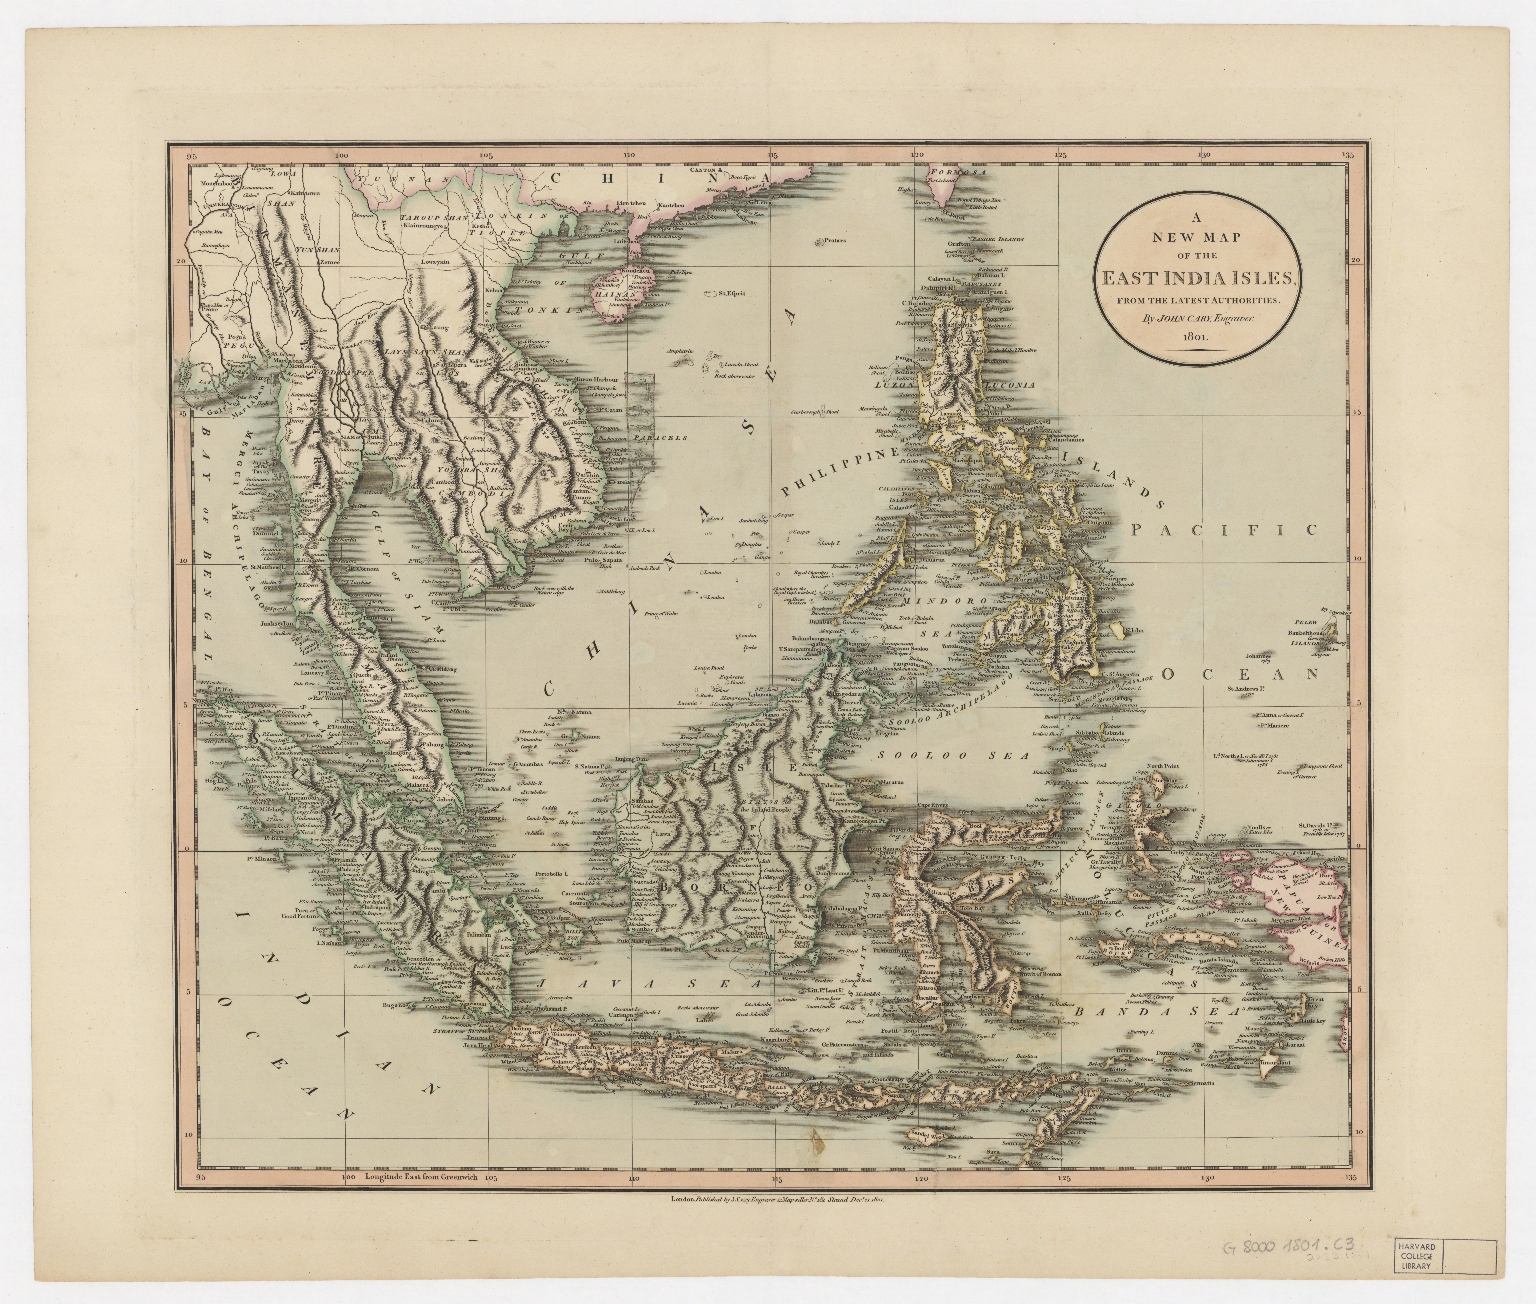 A new map of the East India Isles from the latest authorities